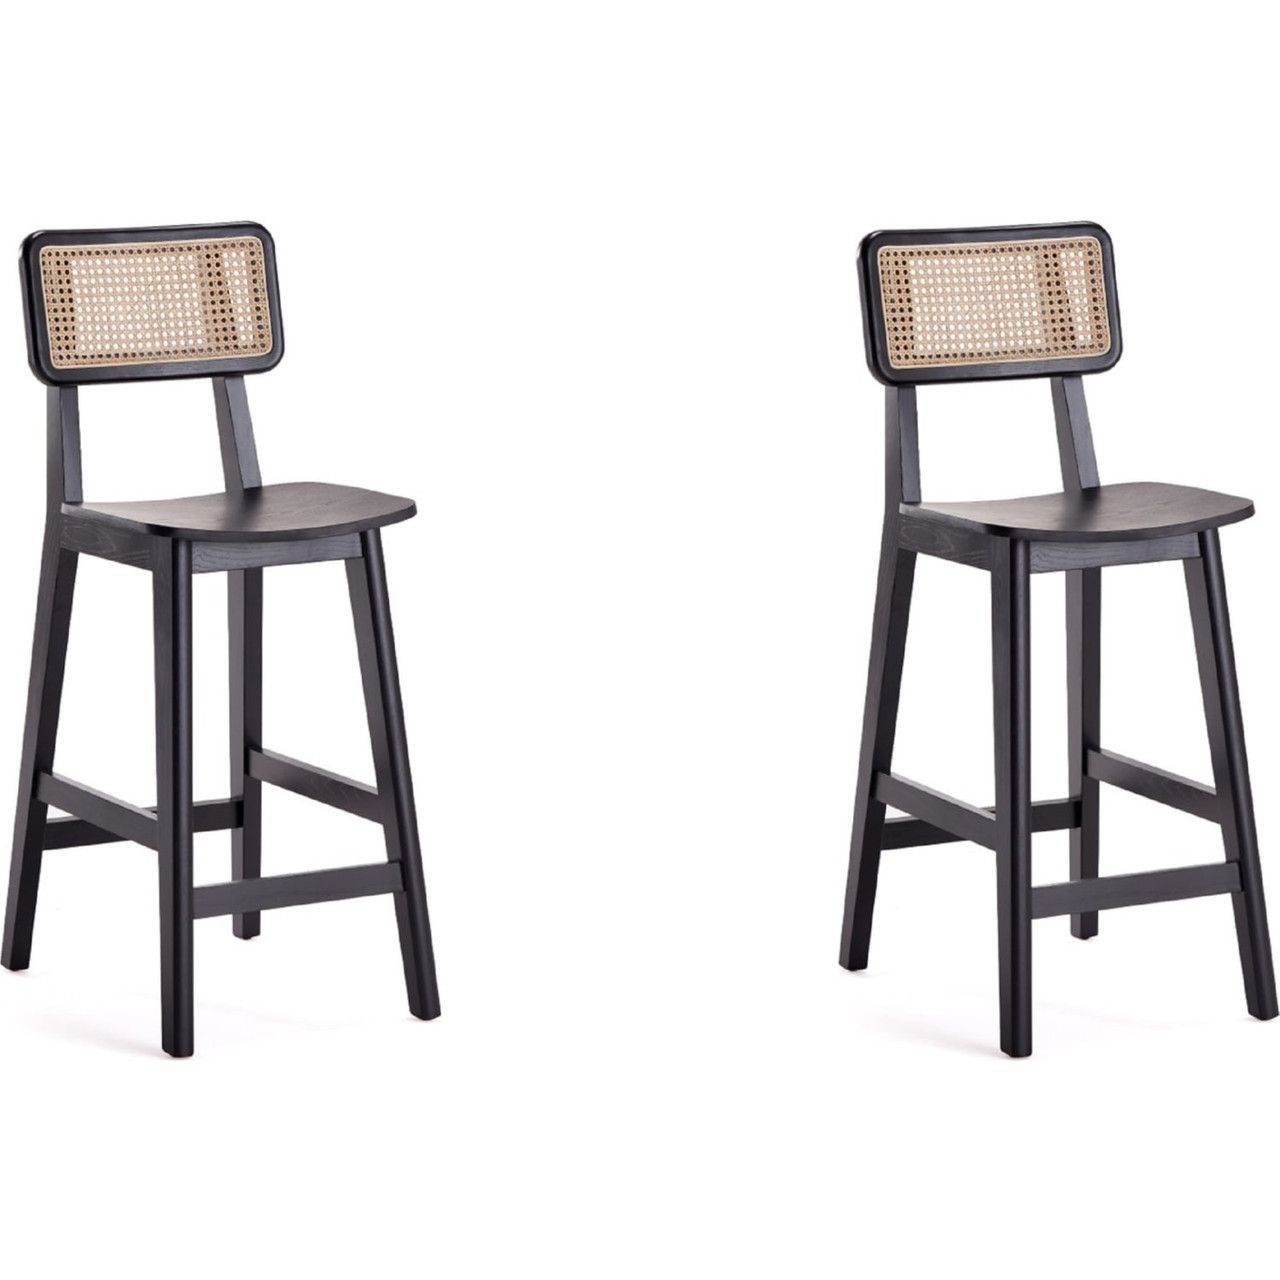 Versailles Counter Stool in Black and Natural Cane - Set of 2